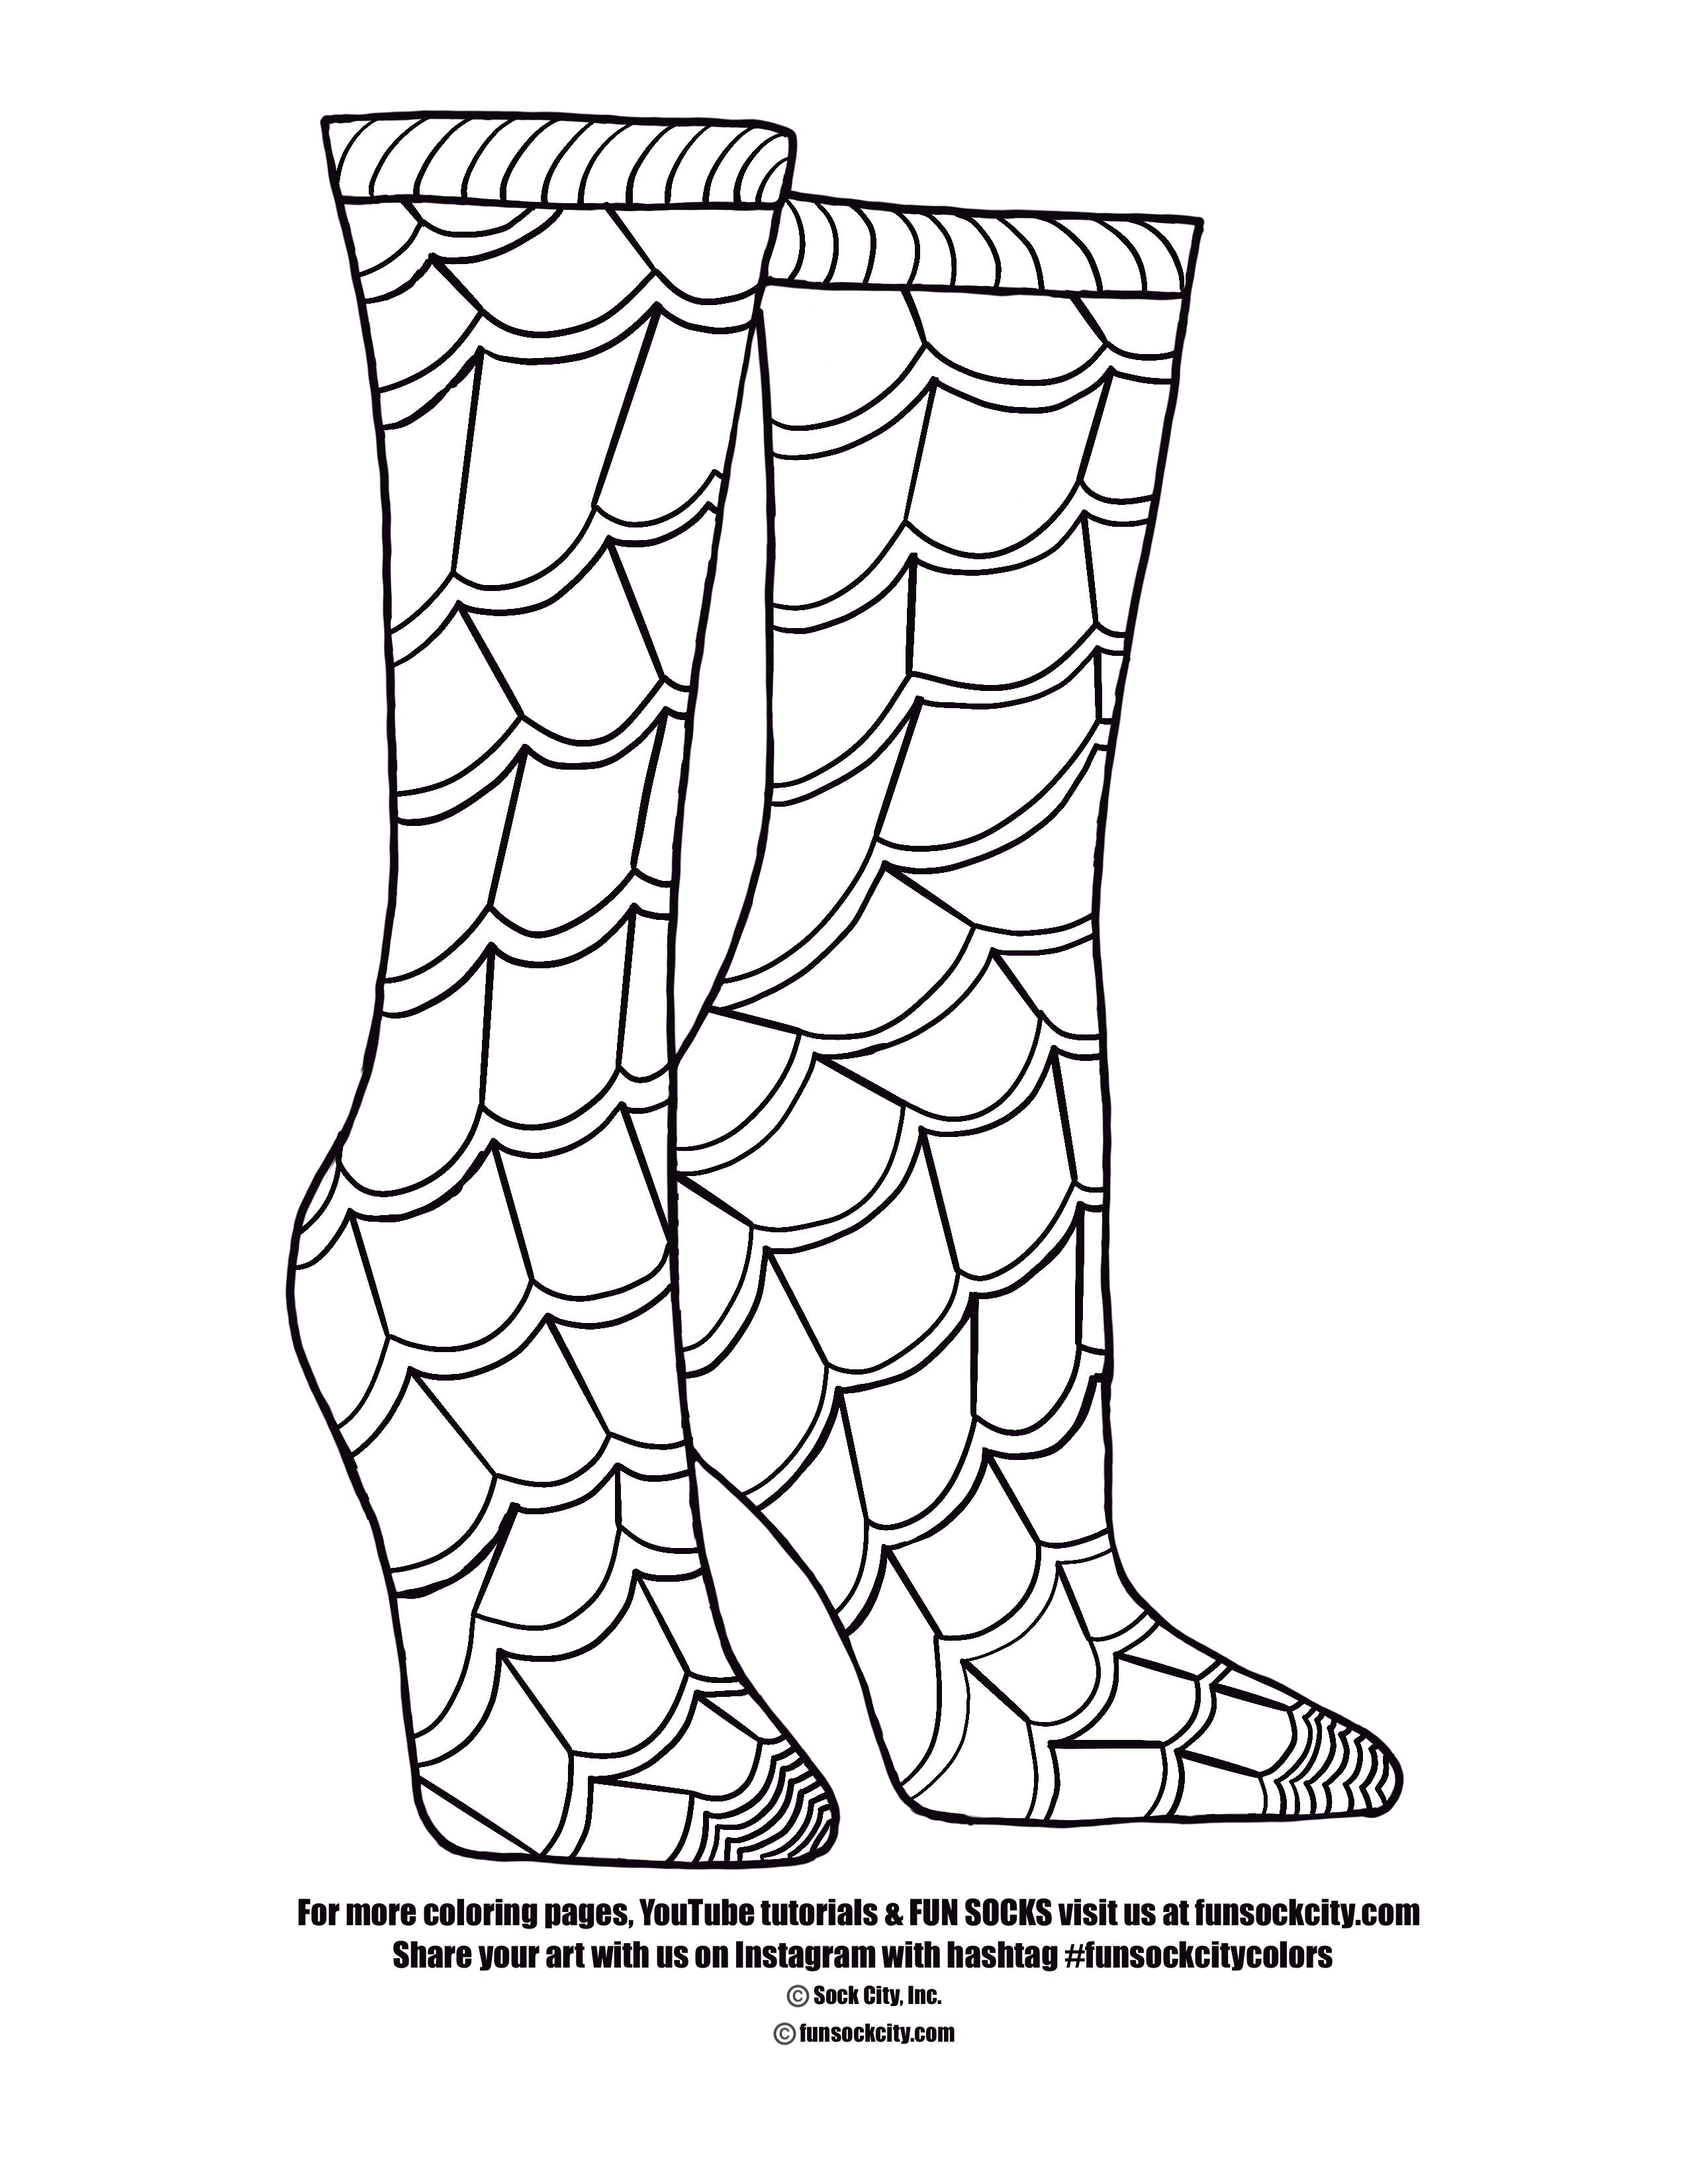 Spiderweb Sock Coloring Page